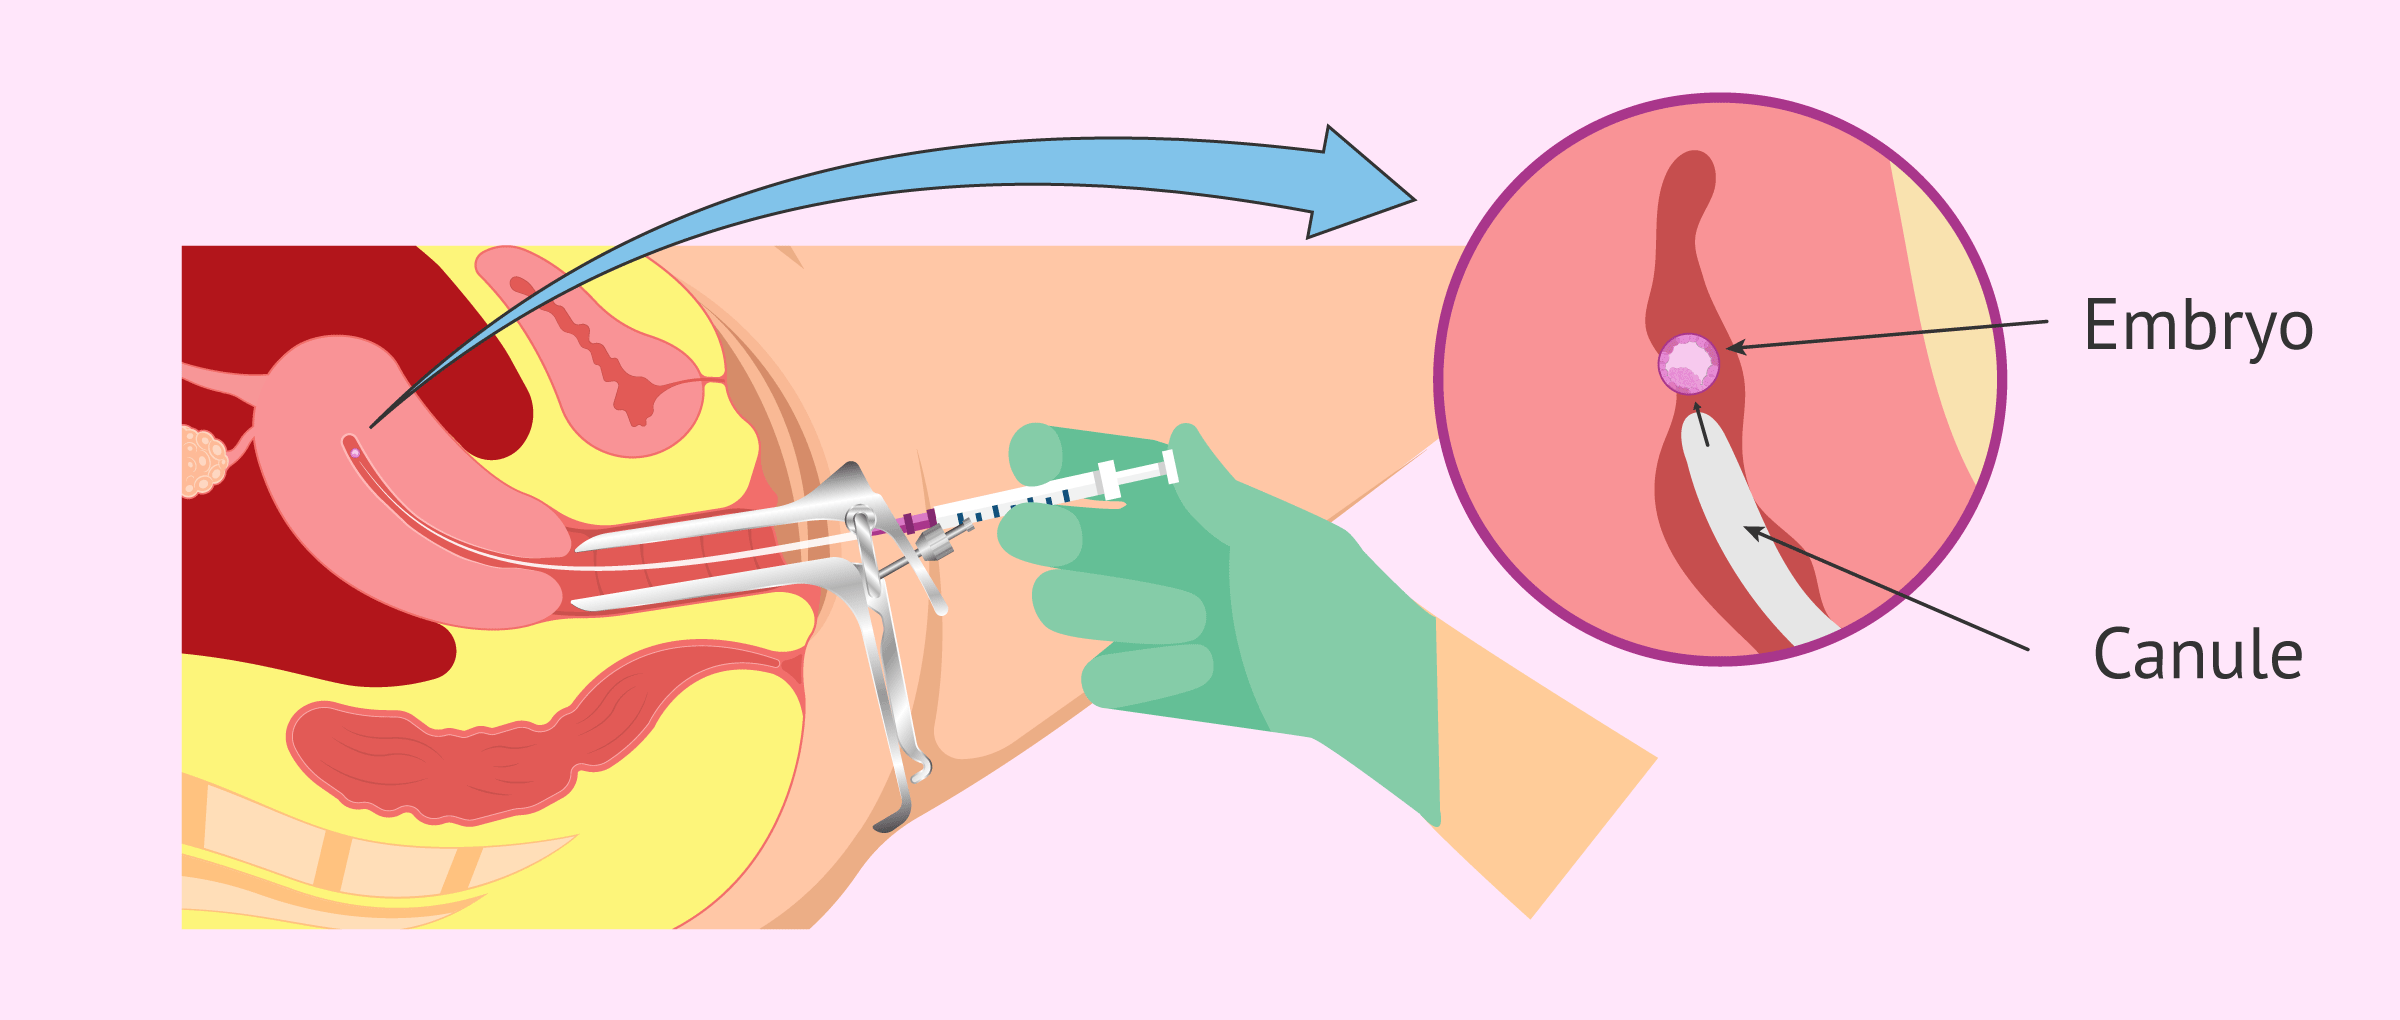 The embryo transfer phase